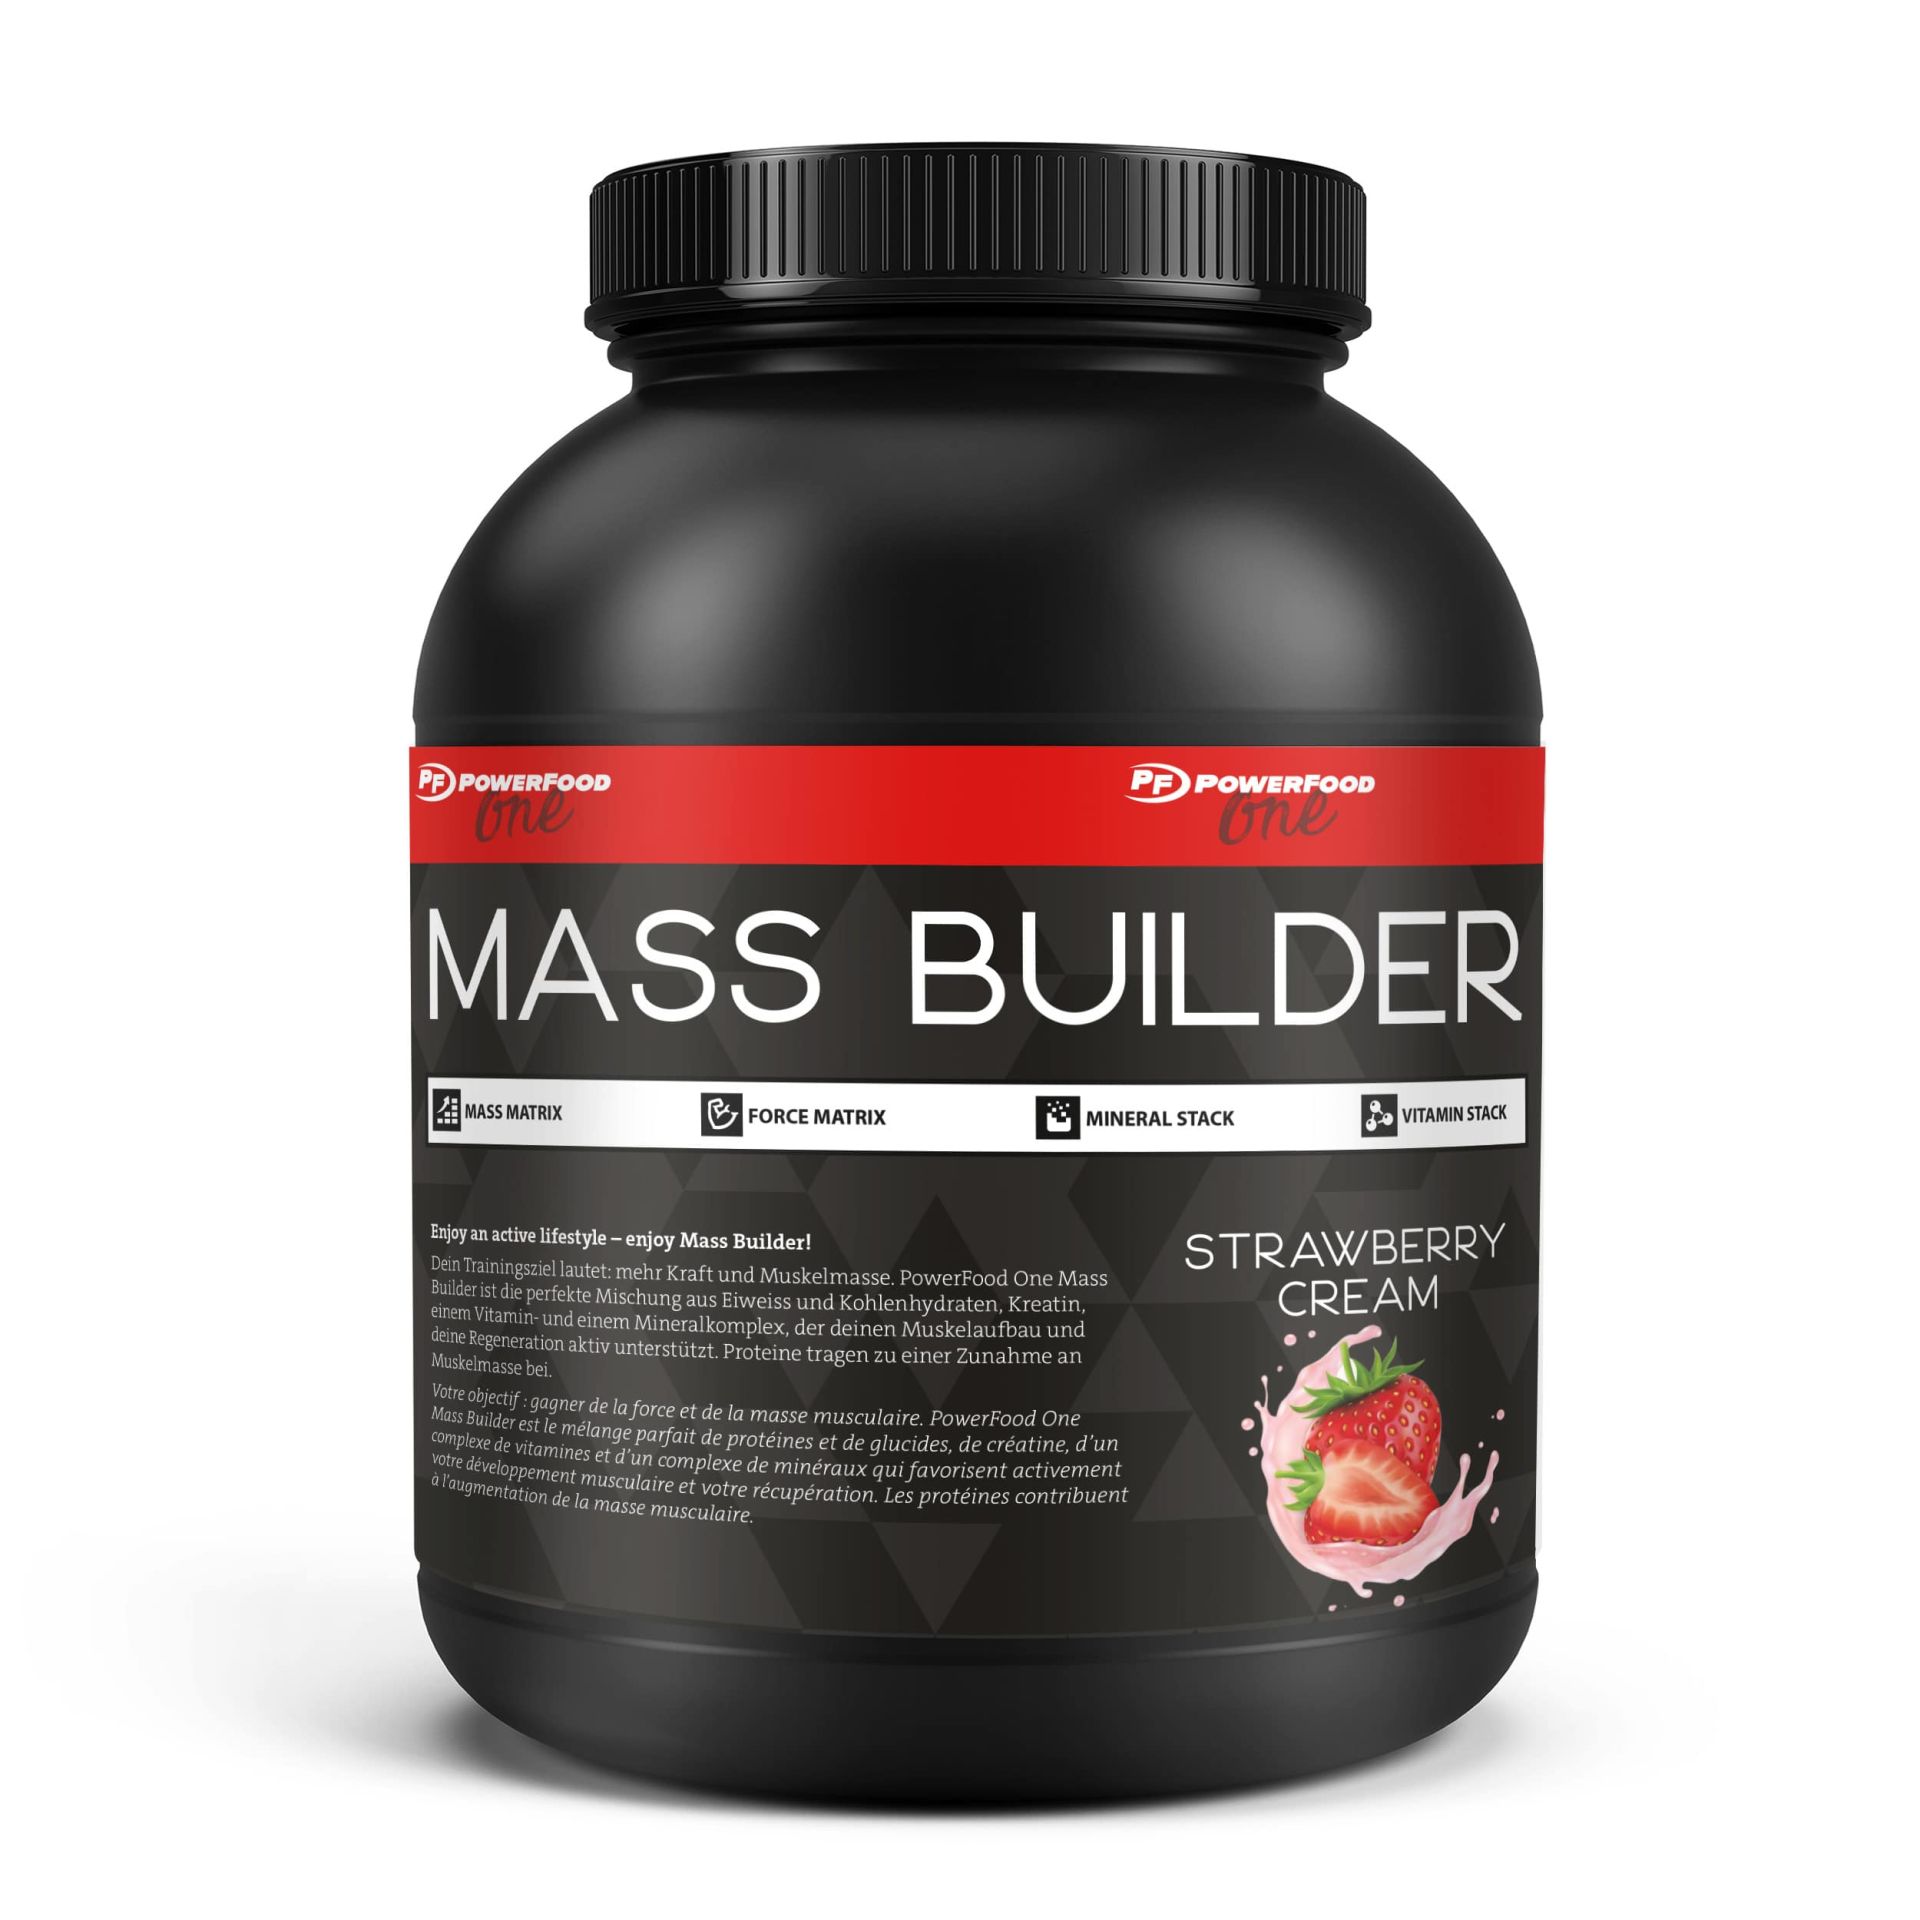 PowerFood One Mass Builder (2500G Dose)